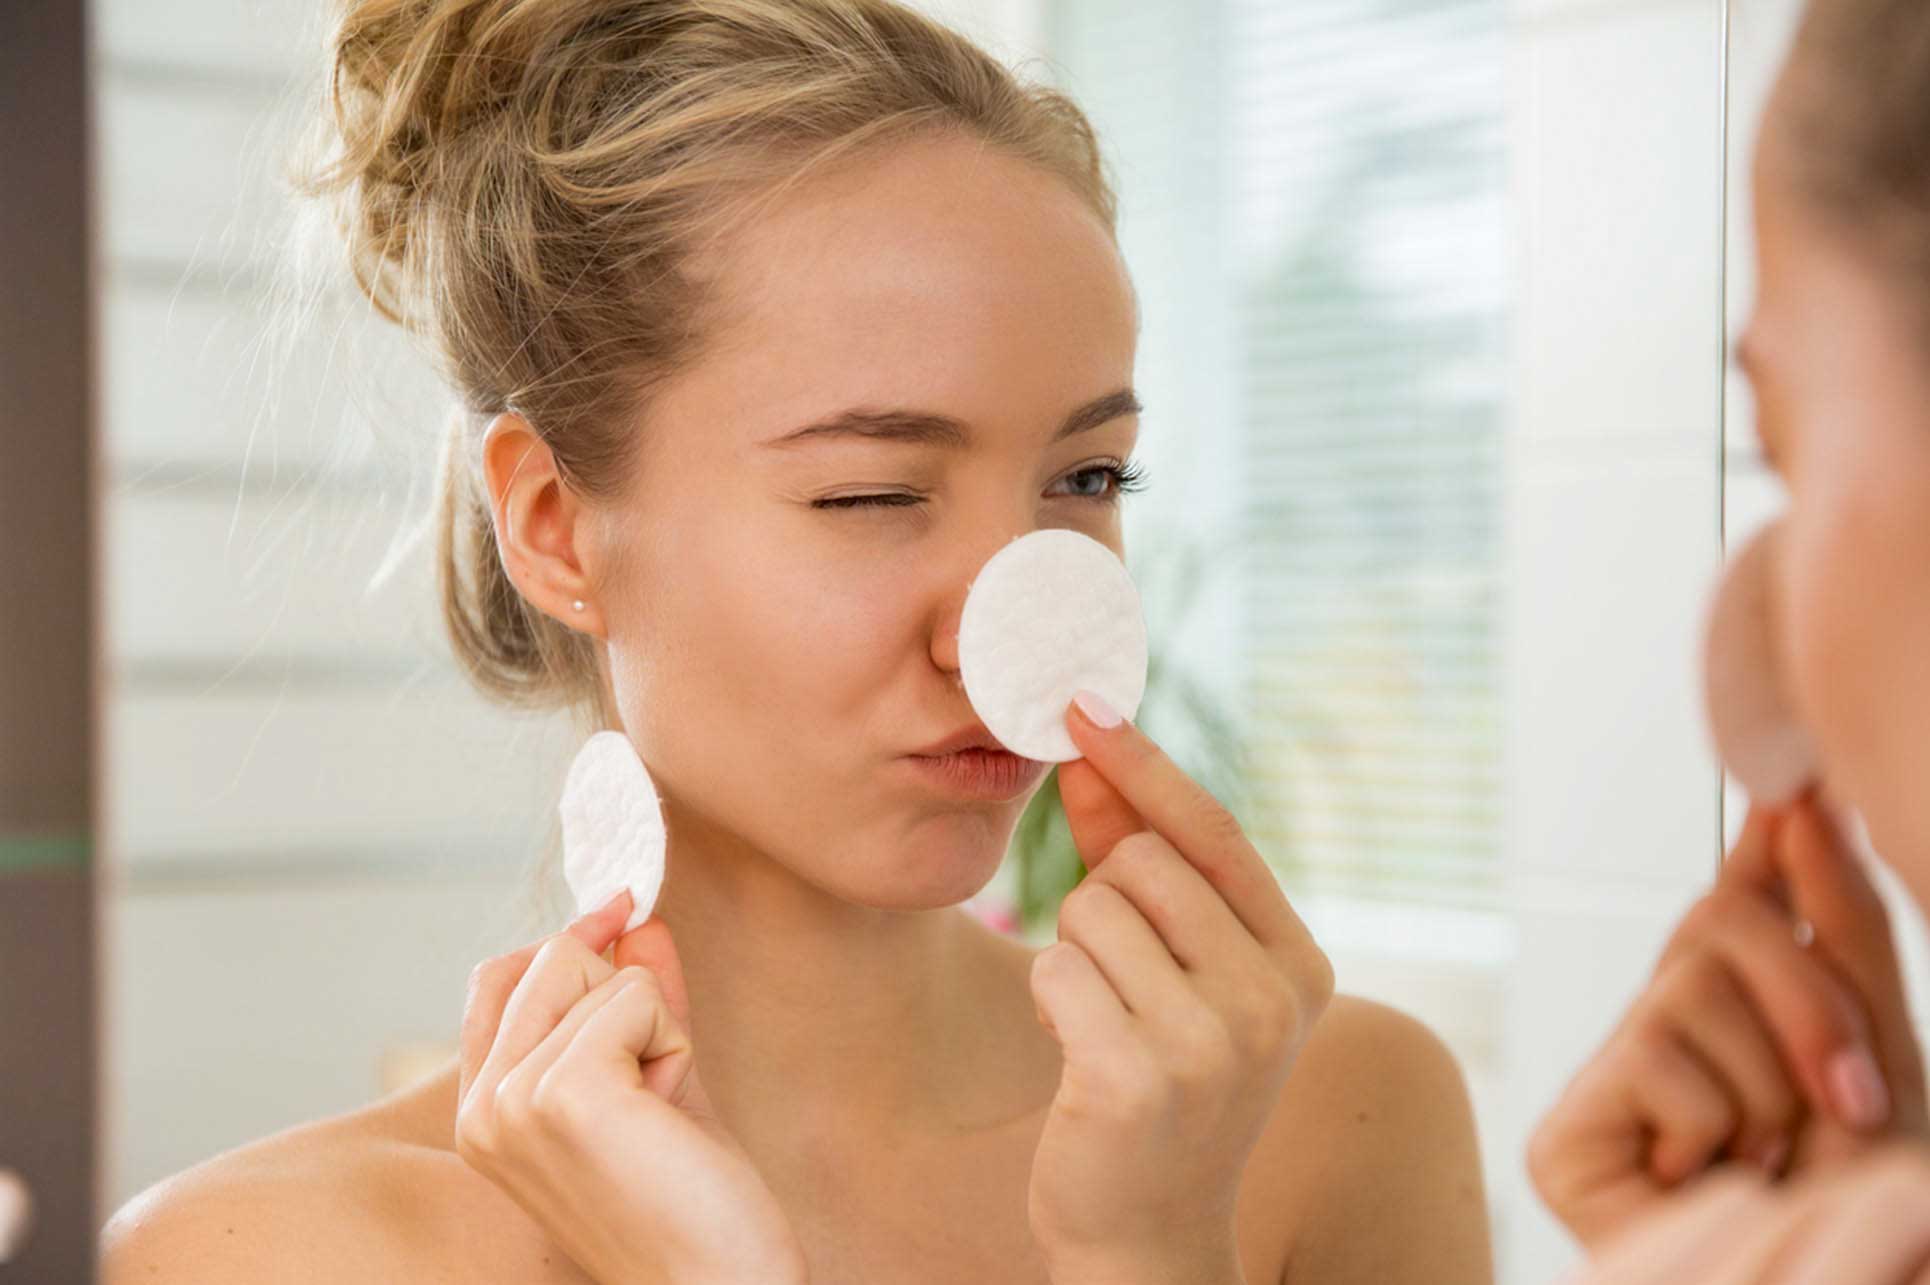 Skincare Routine Steps Should Be Chosen By Climate, Not Skin Type